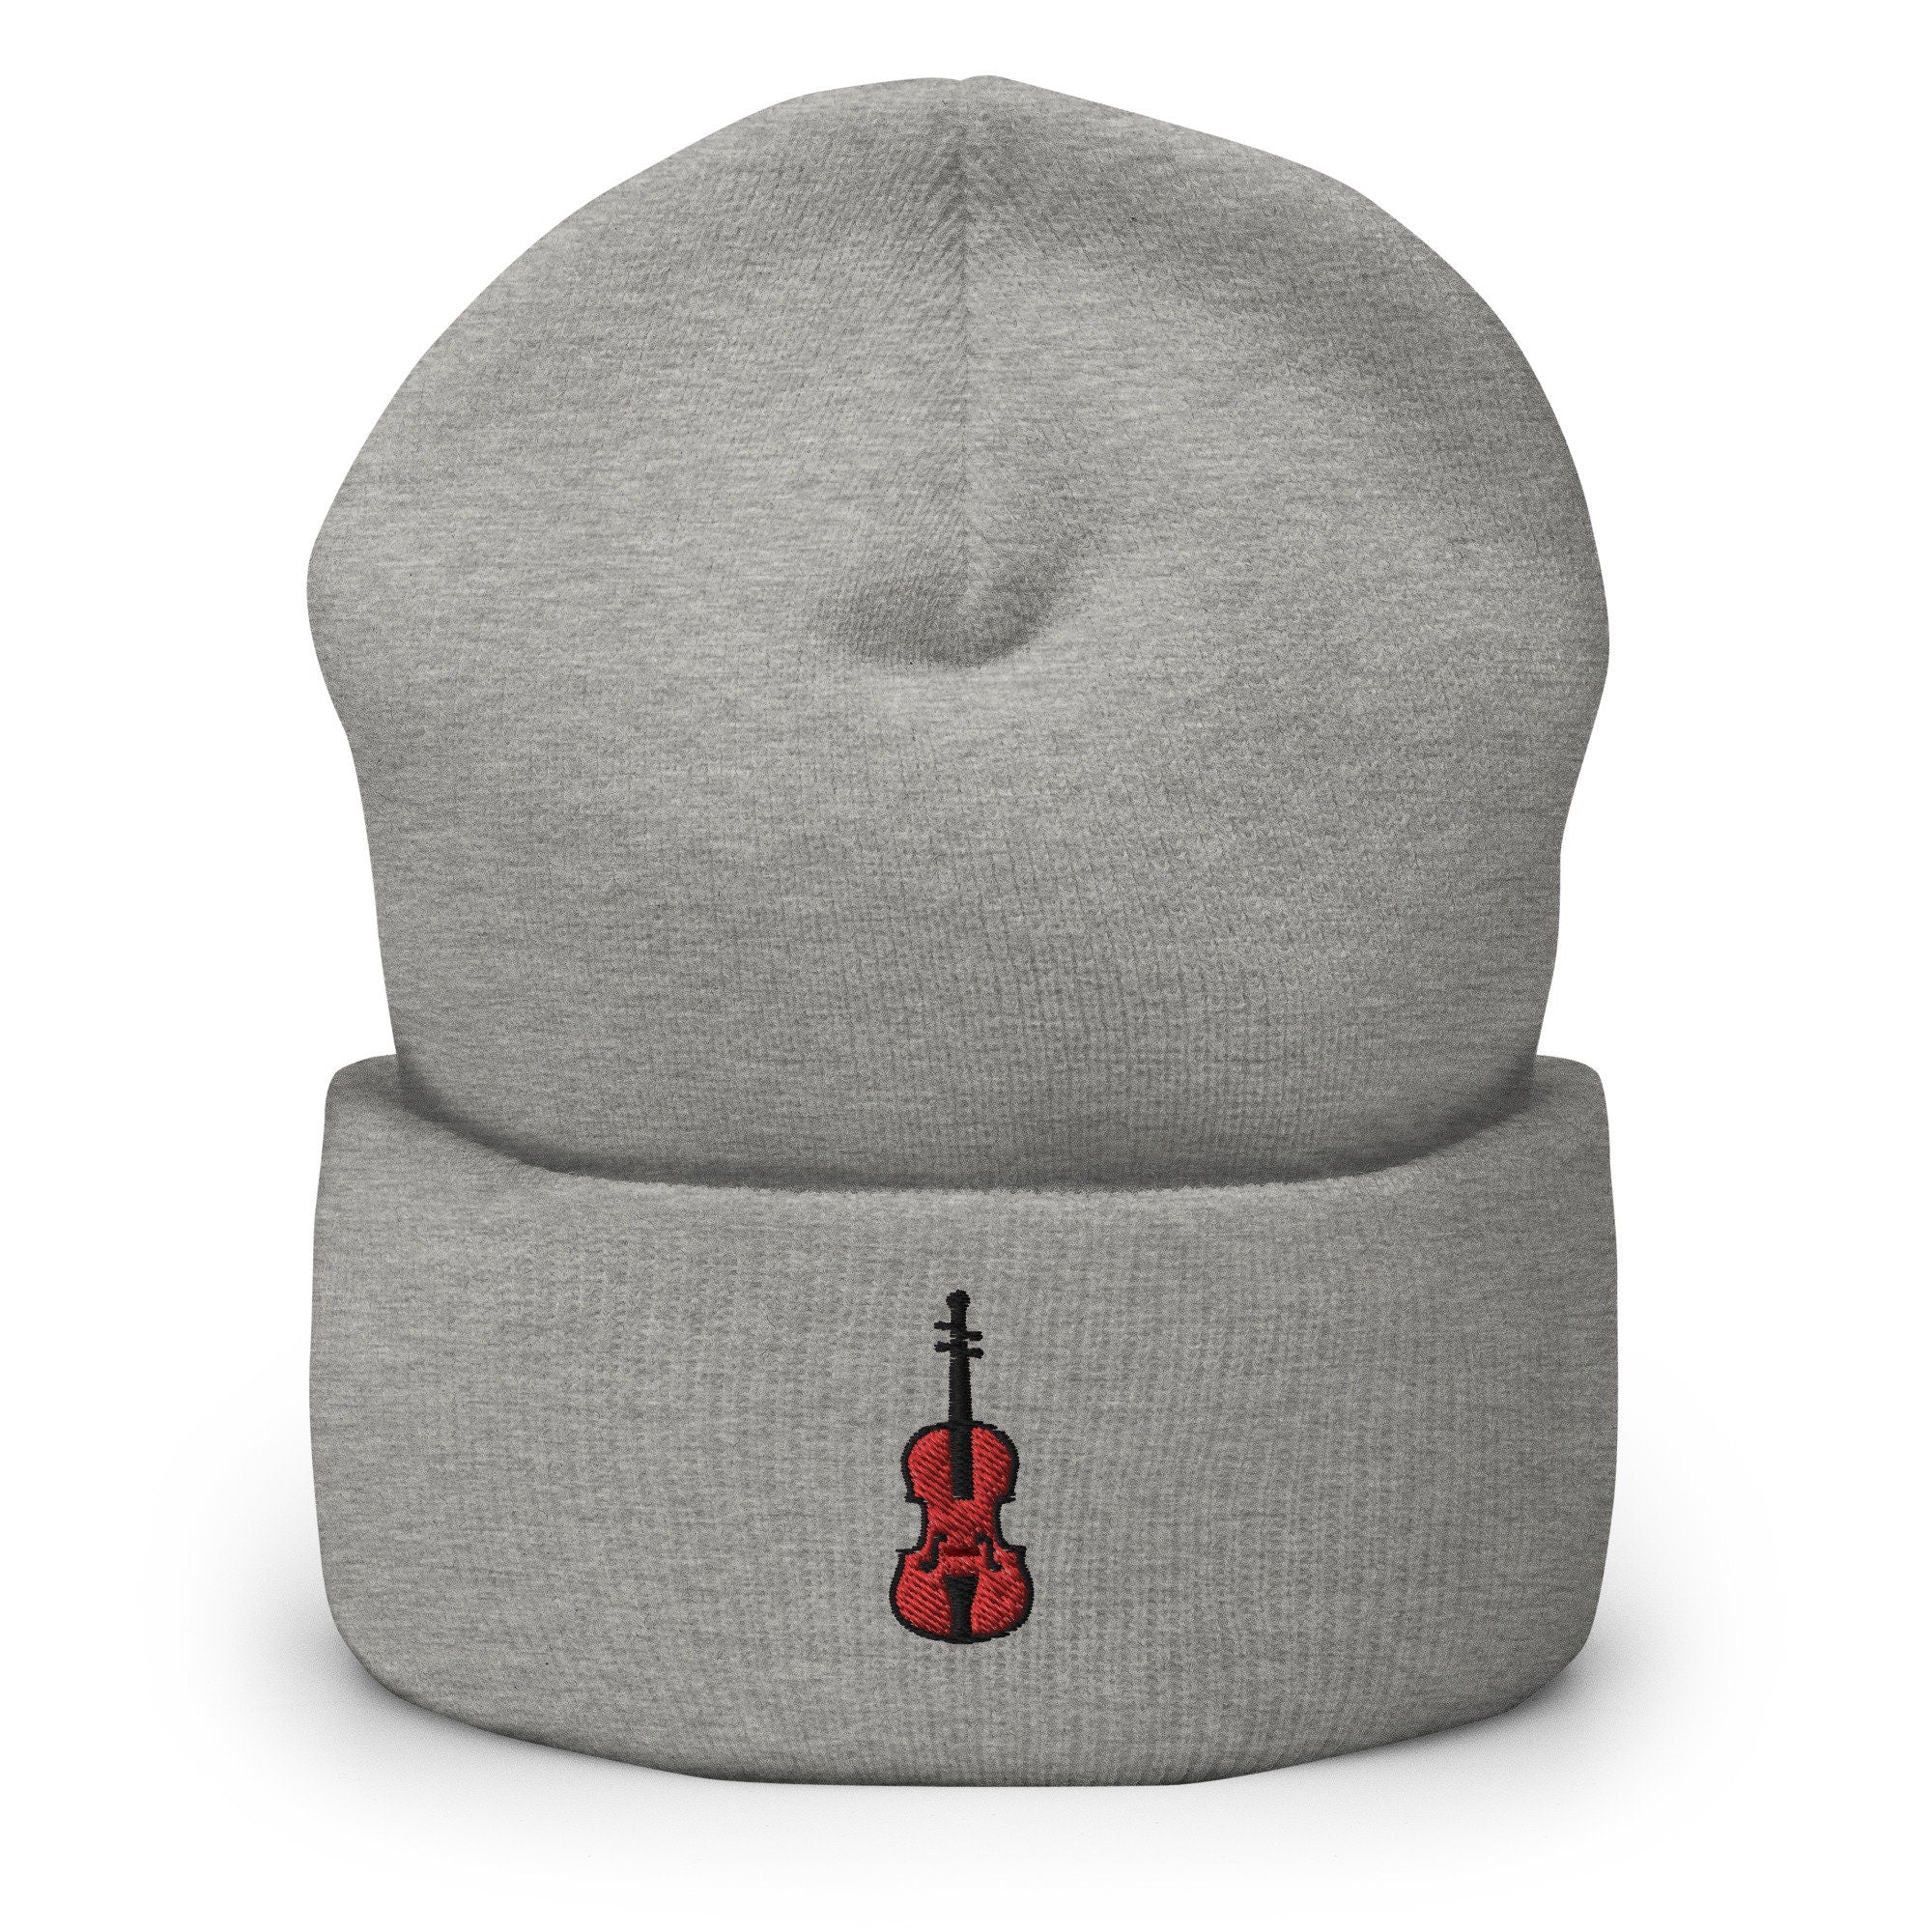 Cellist, Cello Embroidered Beanie, Handmade Cuffed Knit Unisex Slouchy Adult Winter Hat Cap Gift